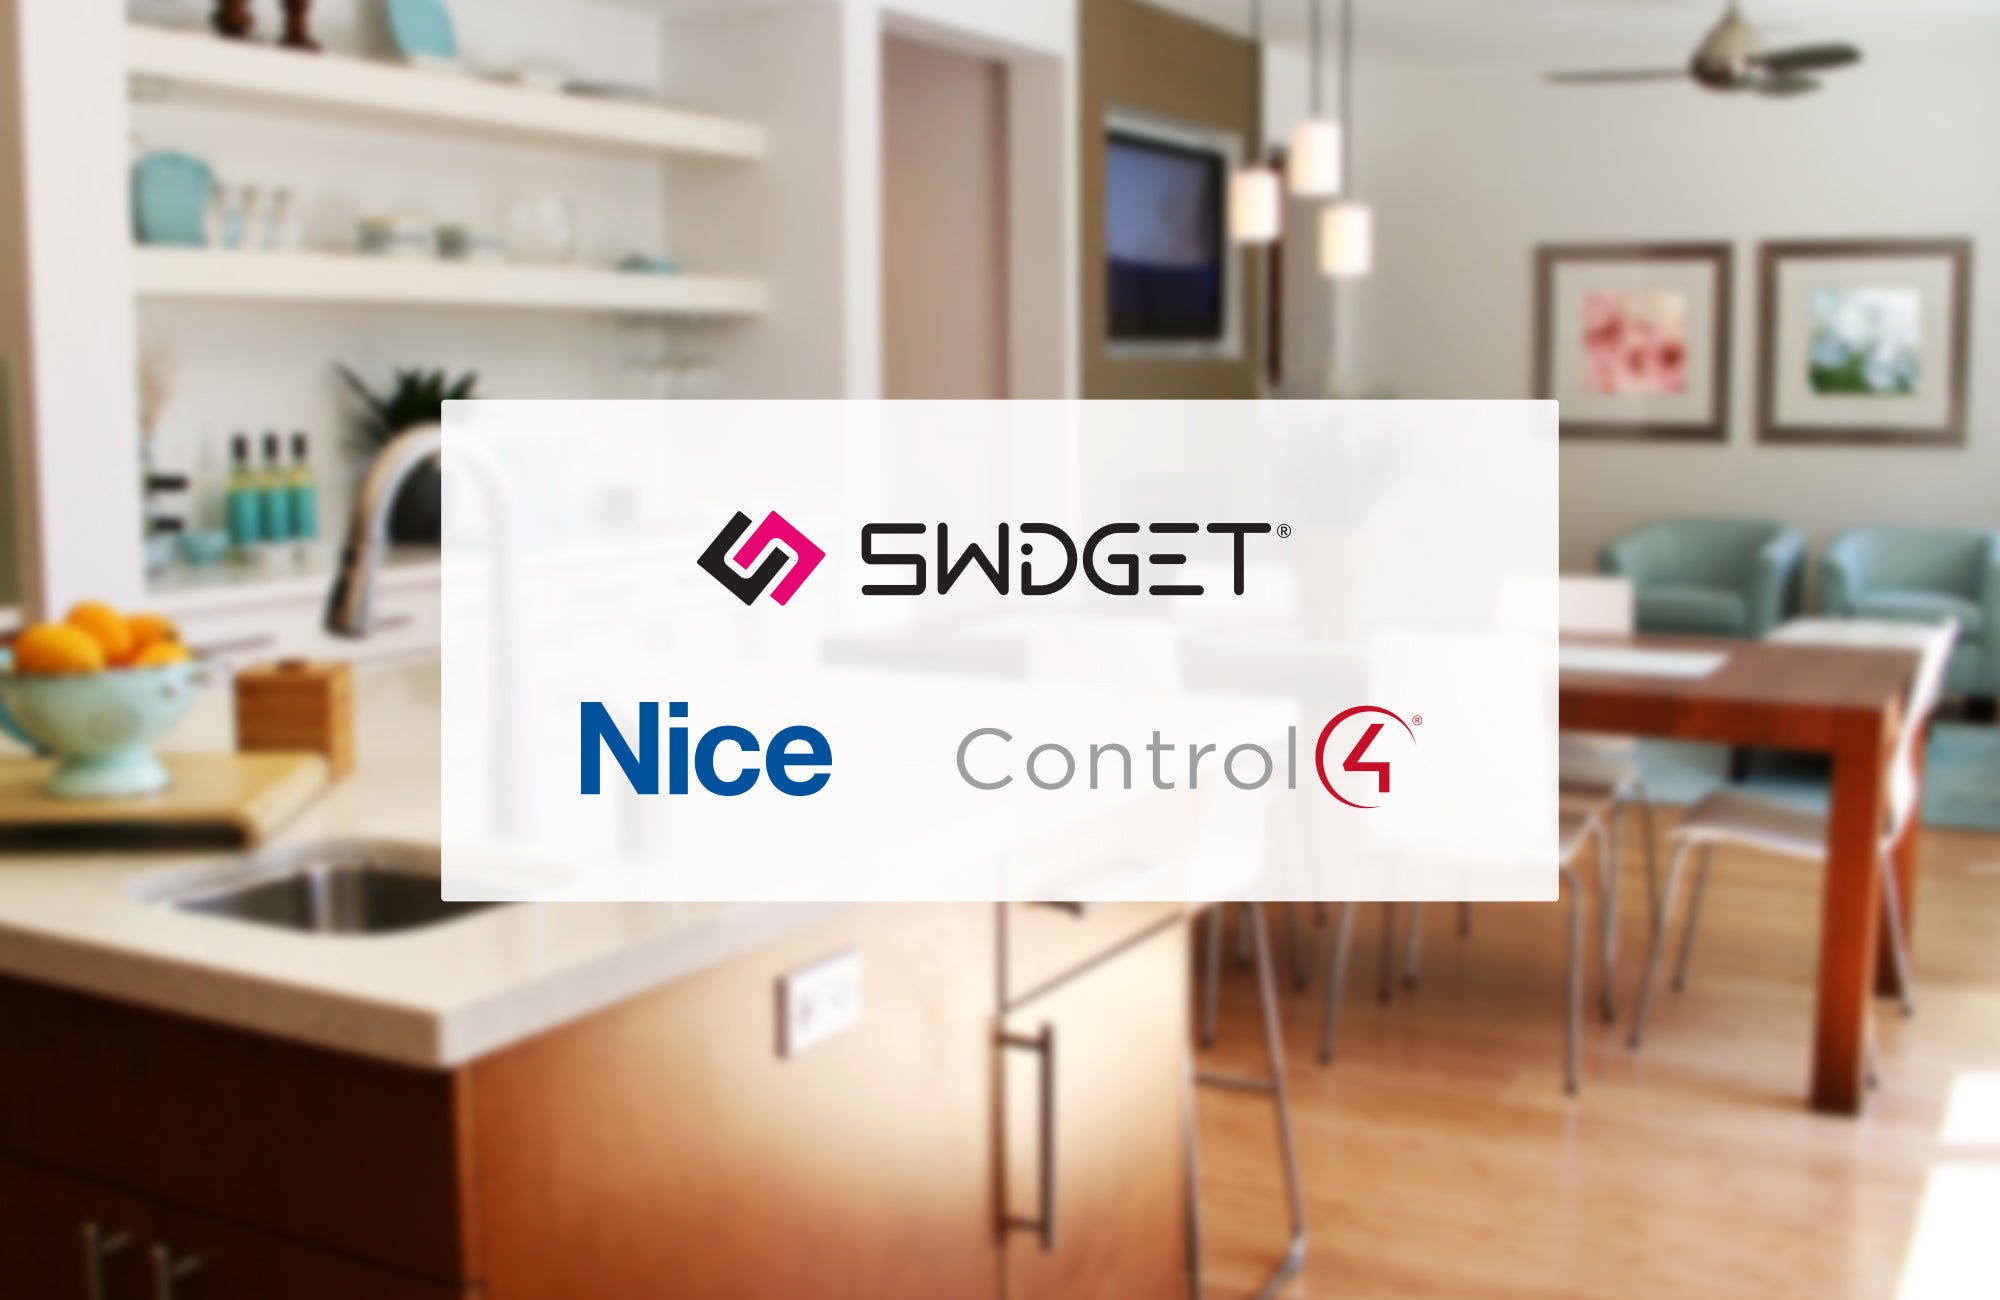 Swidget Elevates Home Automation Experience with Control4 and Nice Integrations